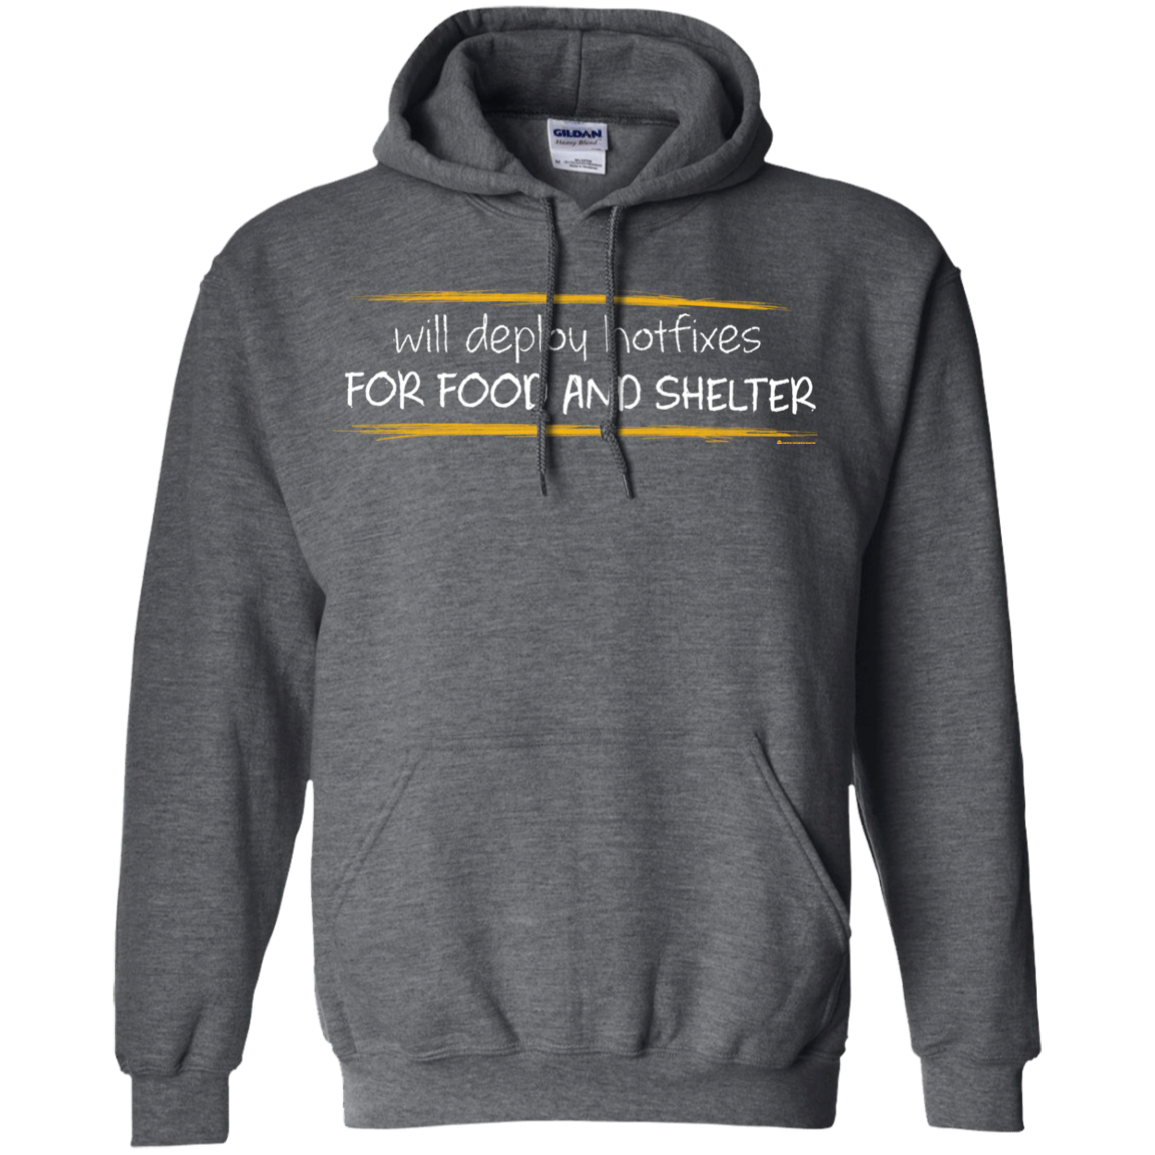 Deploying Hotfixes For Food And Shelter Pullover Hoodie